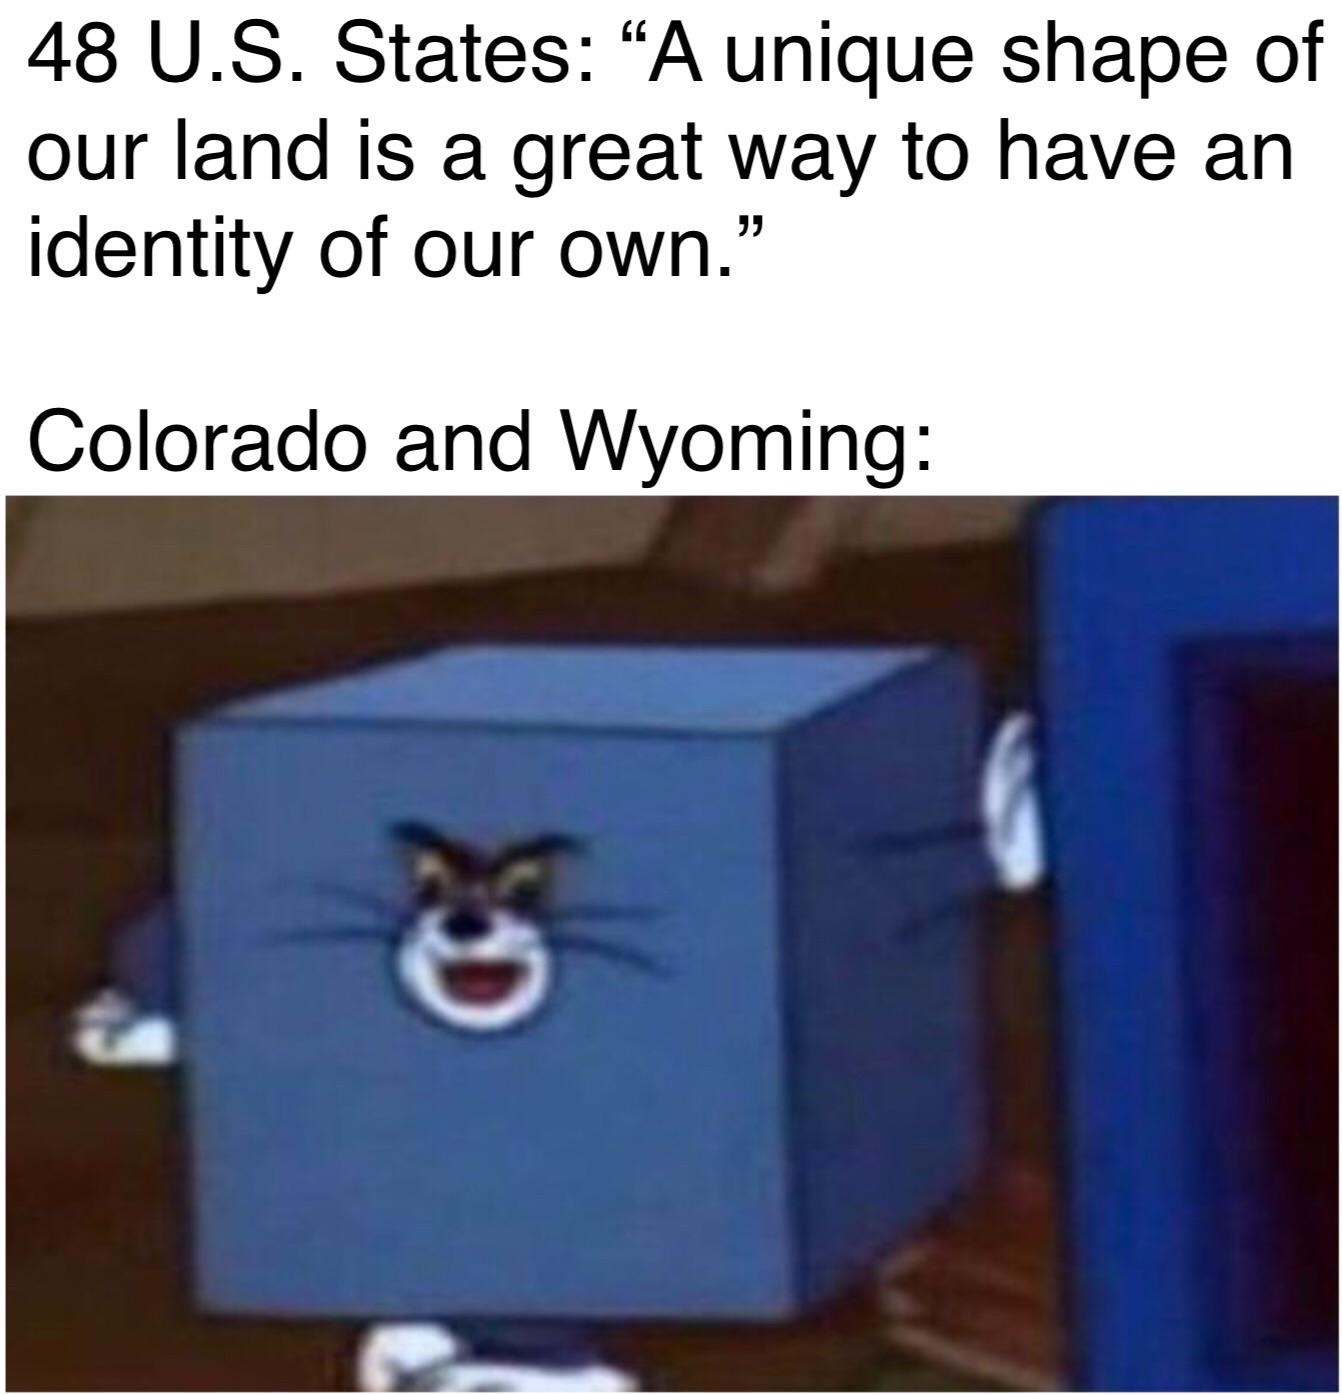 colorado and wyoming square meme - 48 U.S. States A unique shape of our land is a great way to have an identity of our own." Colorado and Wyoming